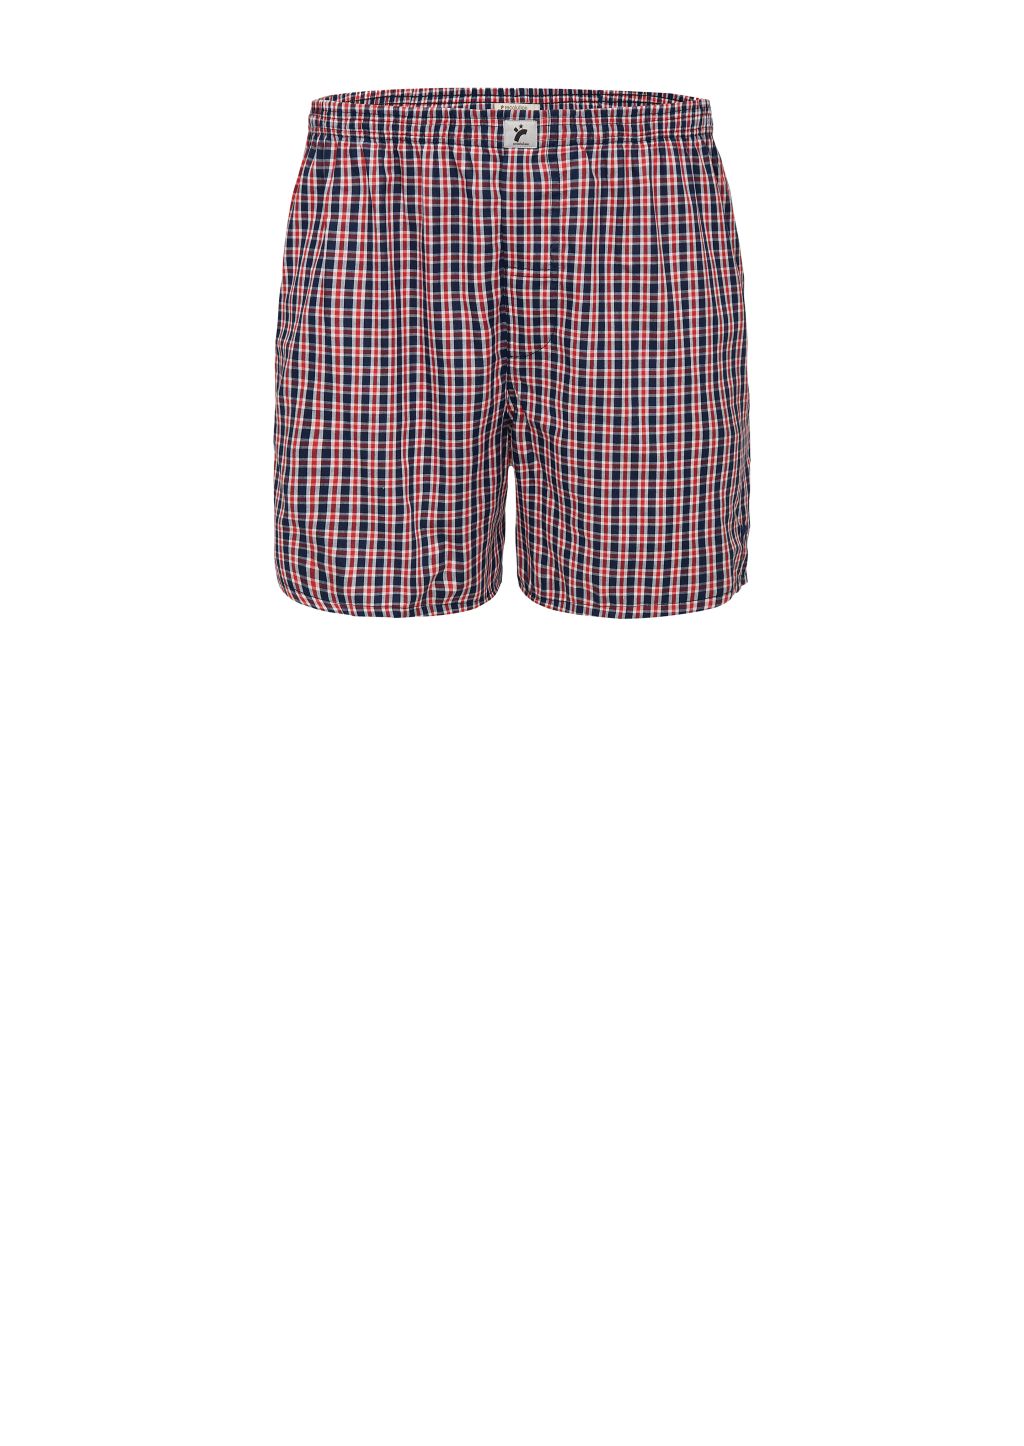 Männer Boxershorts #Checked Blue/White/Red Checked XL